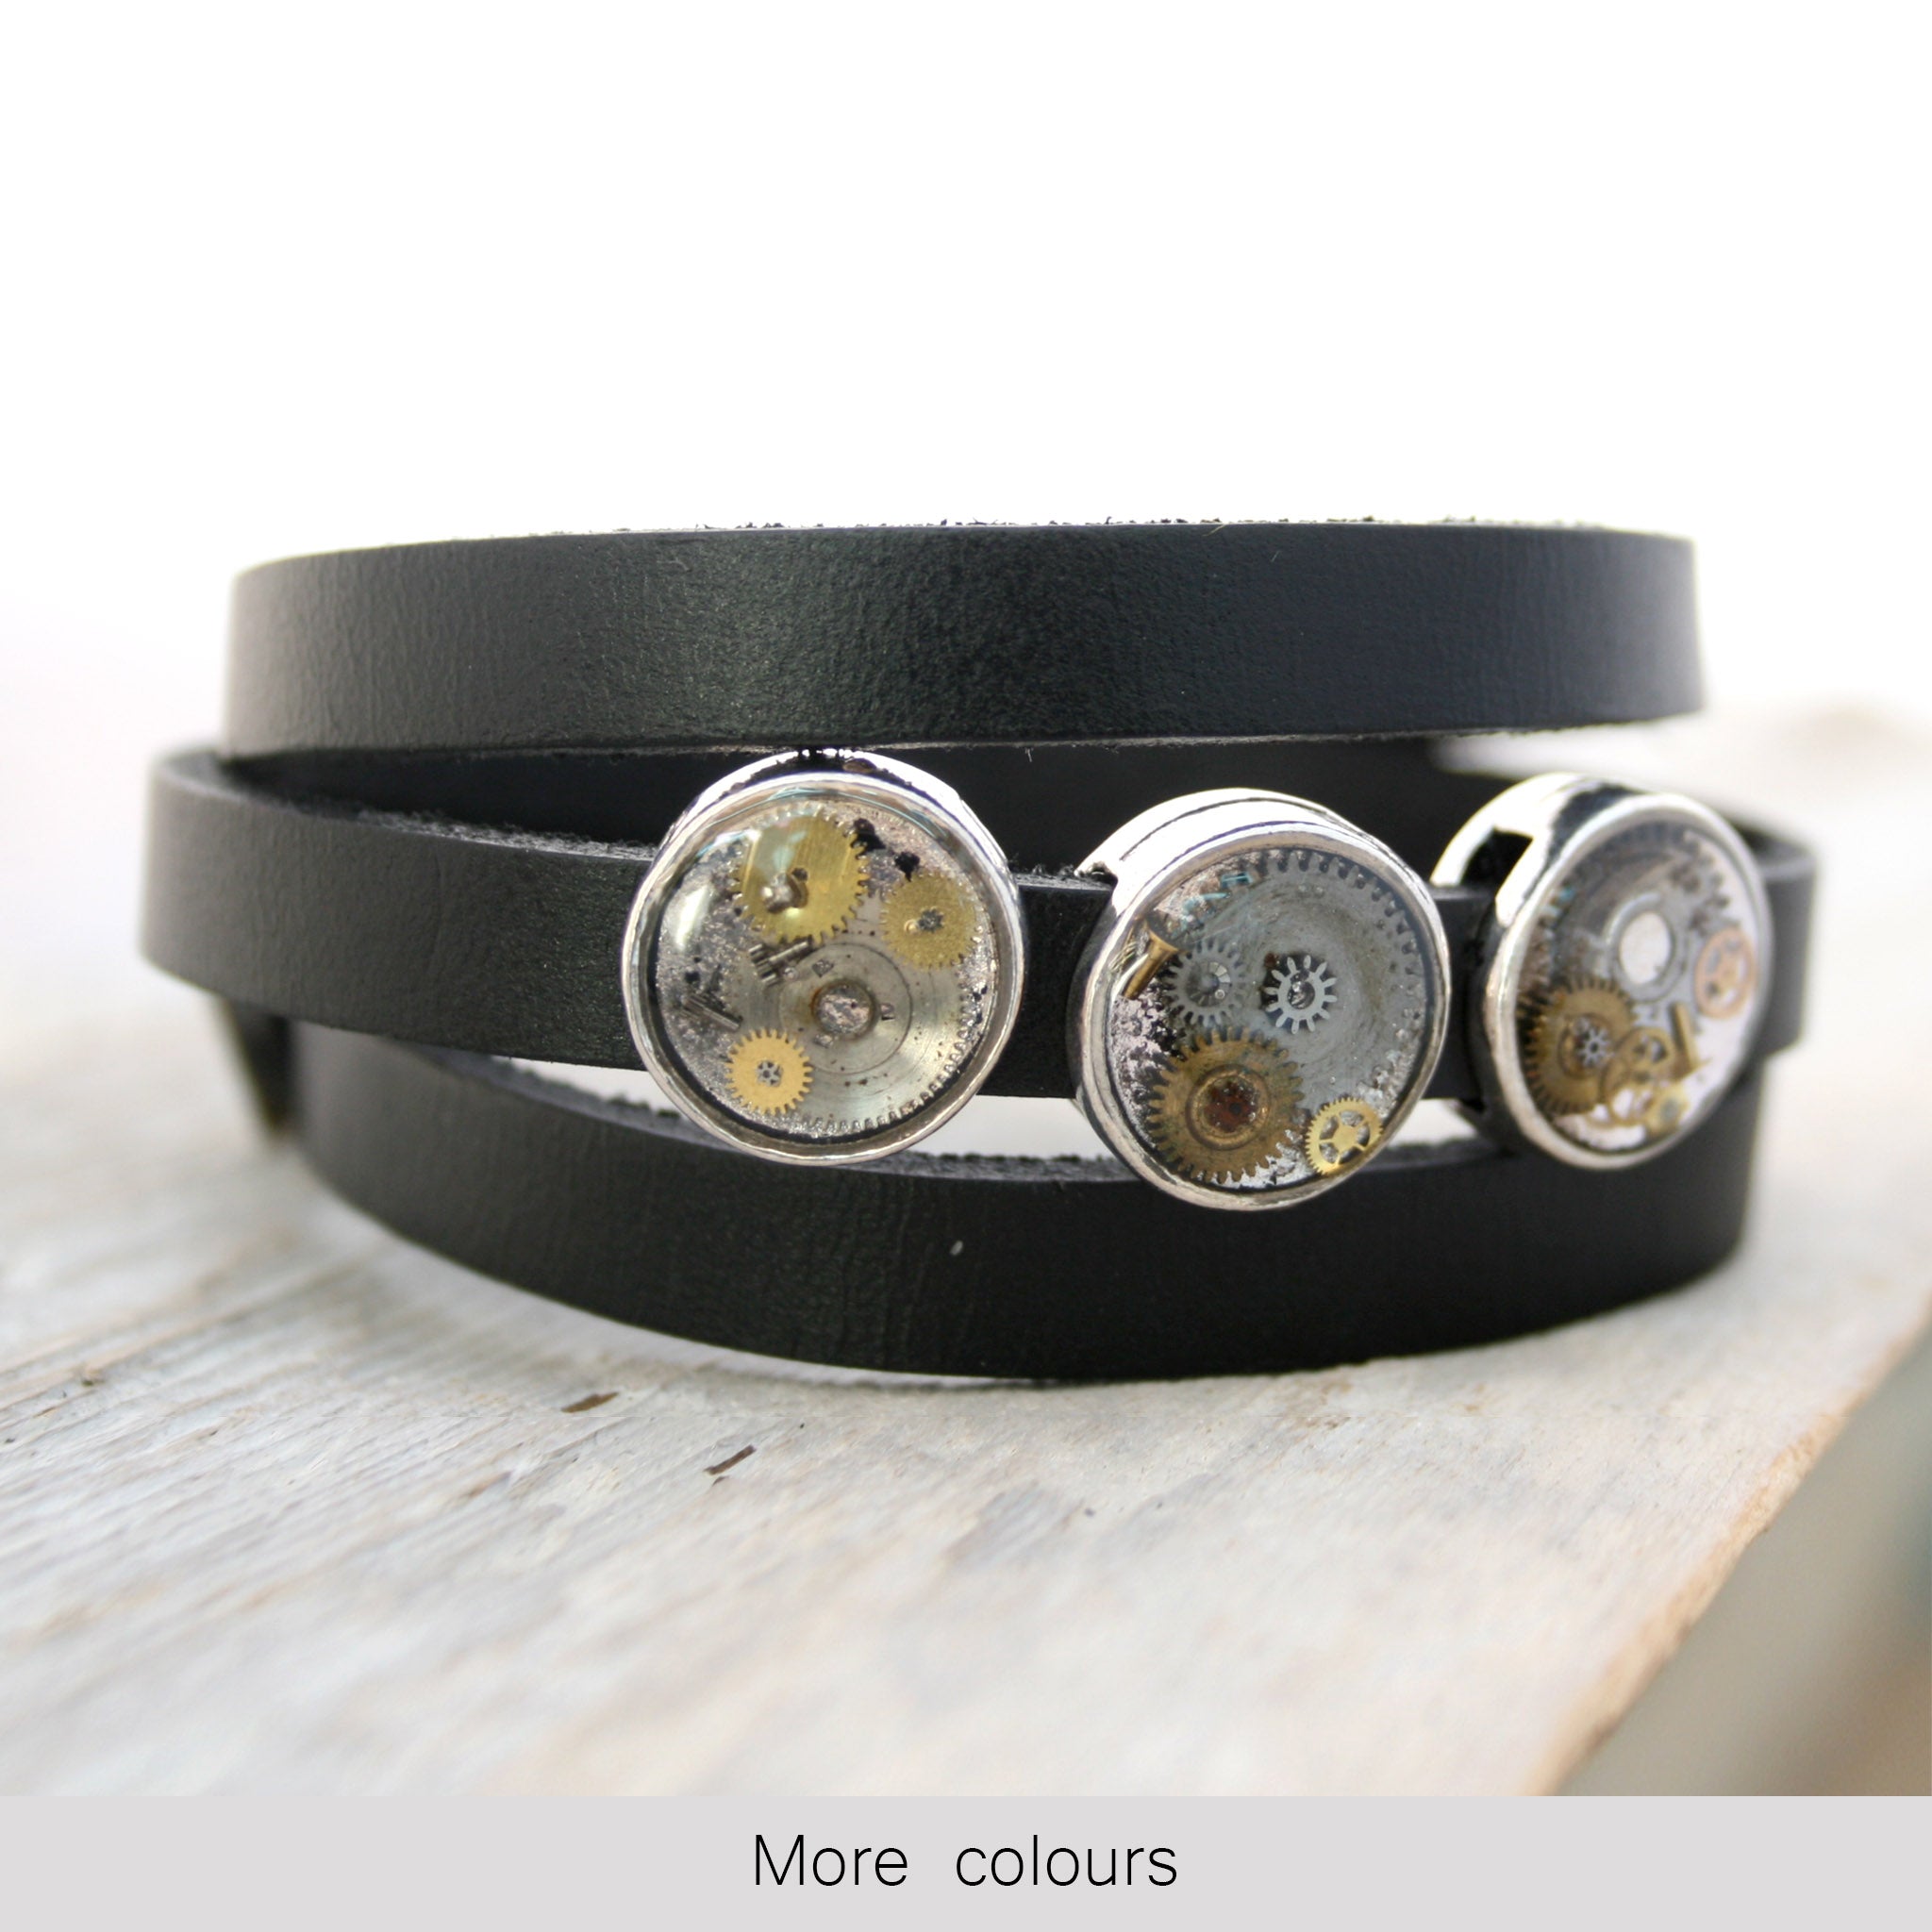 Leather with Beads Double Wrap Bracelet